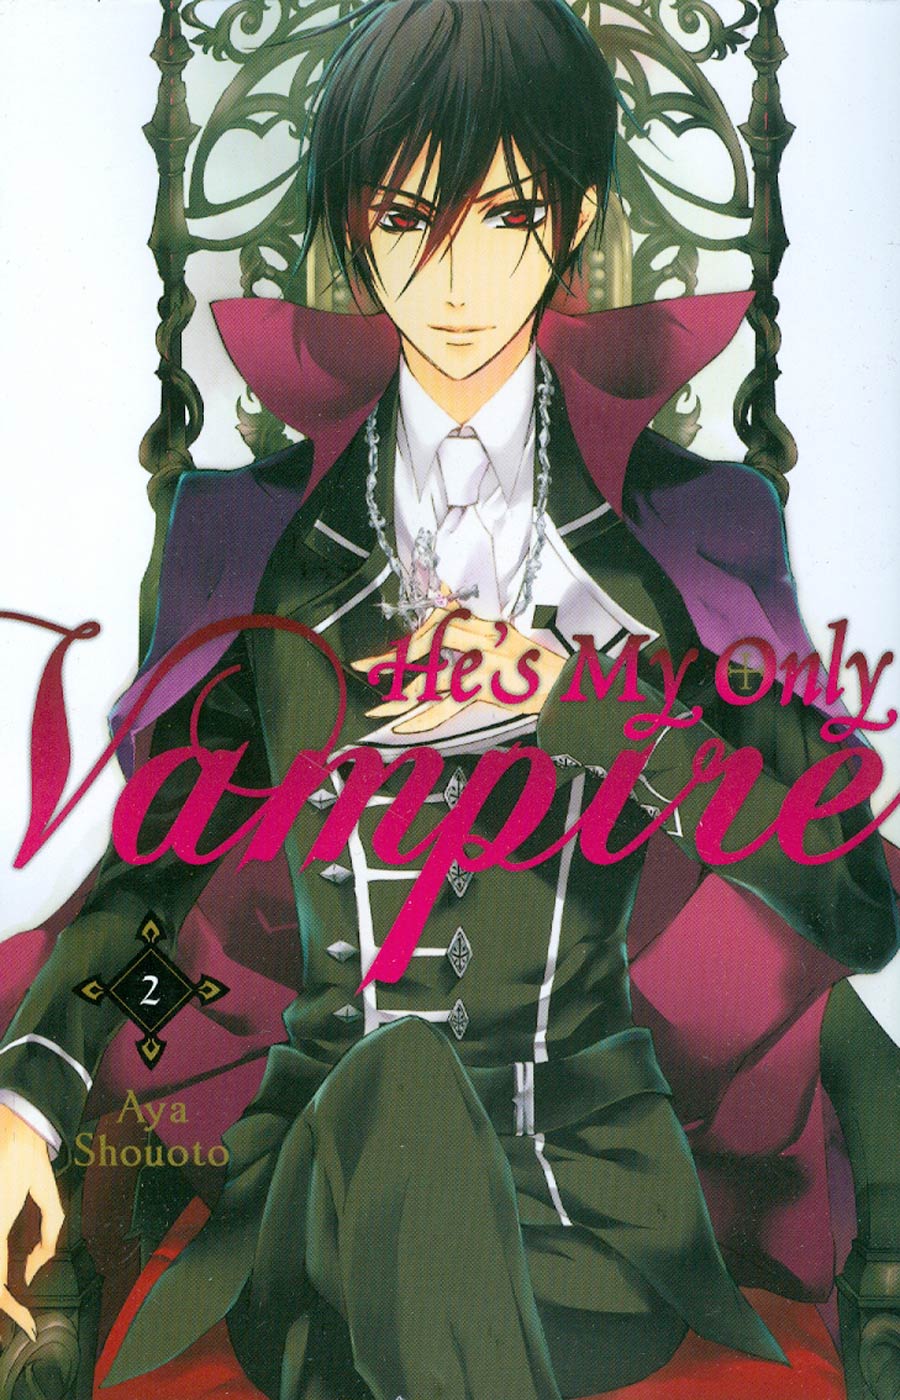 Hes My Only Vampire Vol 2 GN